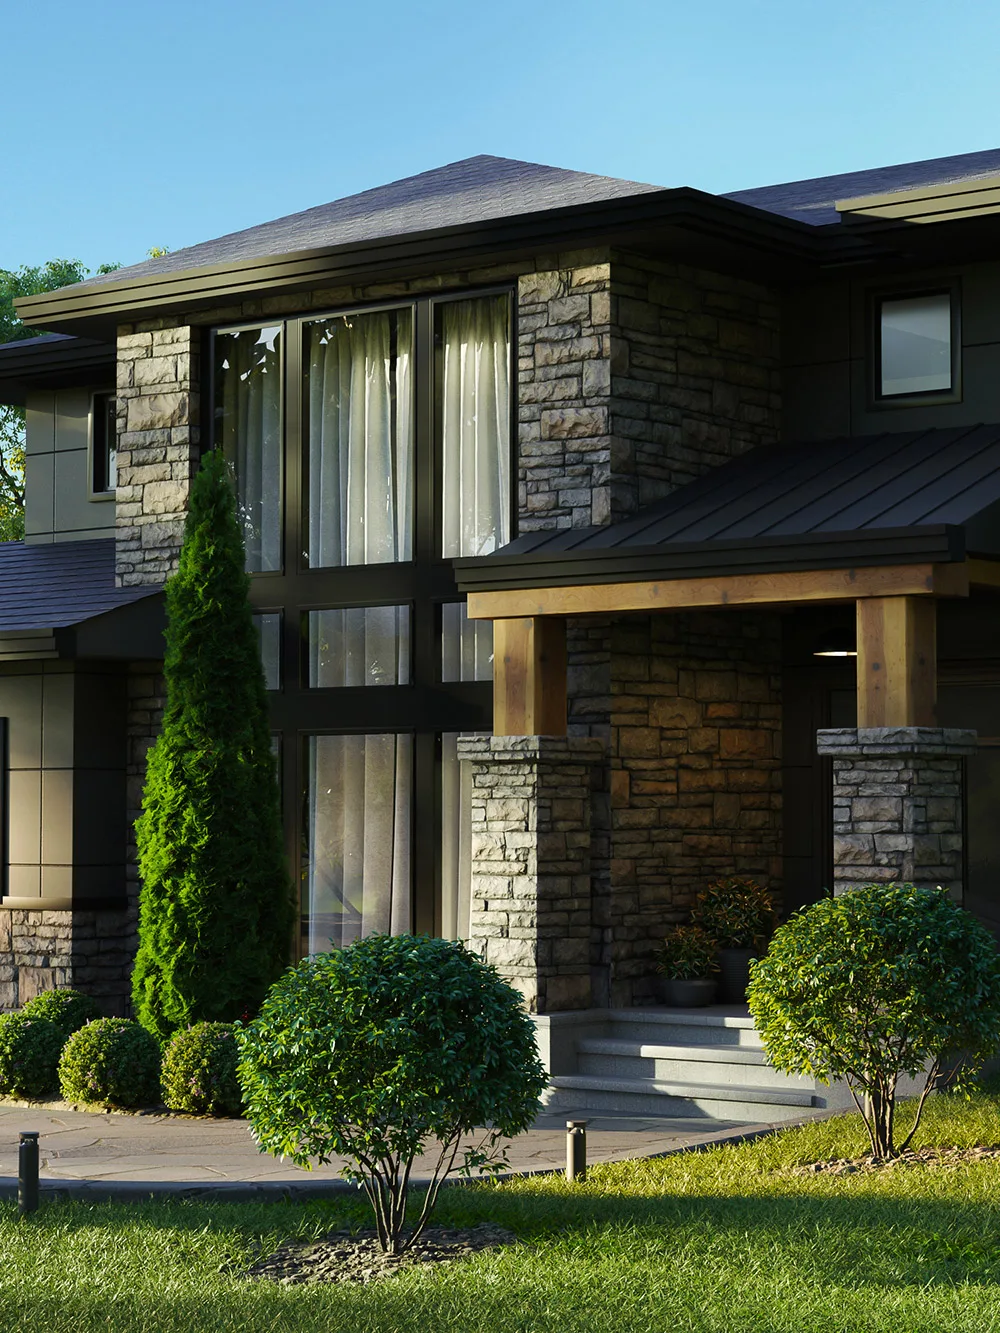 Professional 3D rendering services showcasing a detailed architectural mode